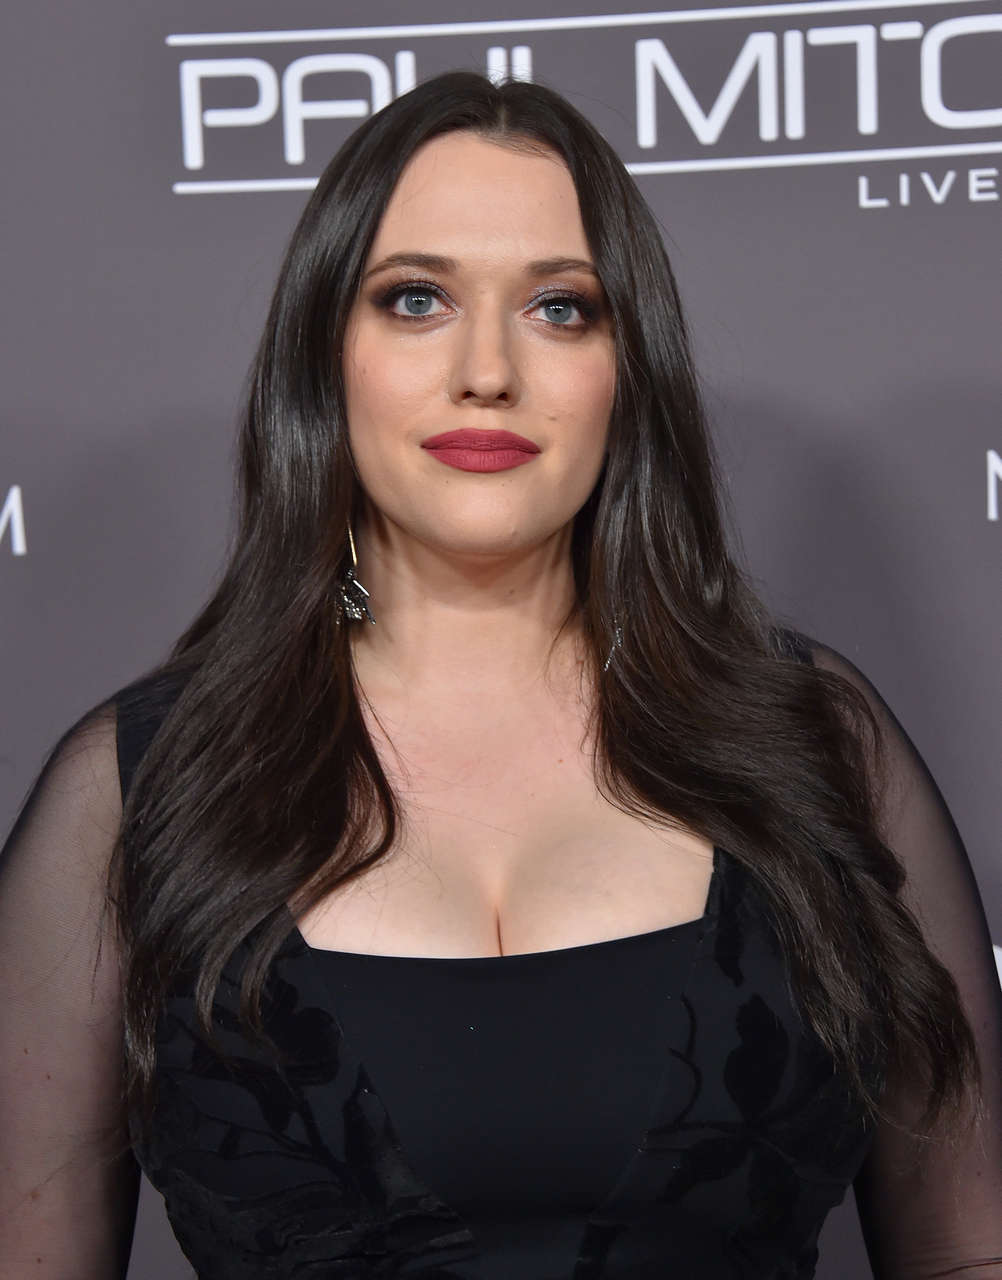 Kat Dennings Is Most Beautiful Celeb With Big Tits For Me Big Tit